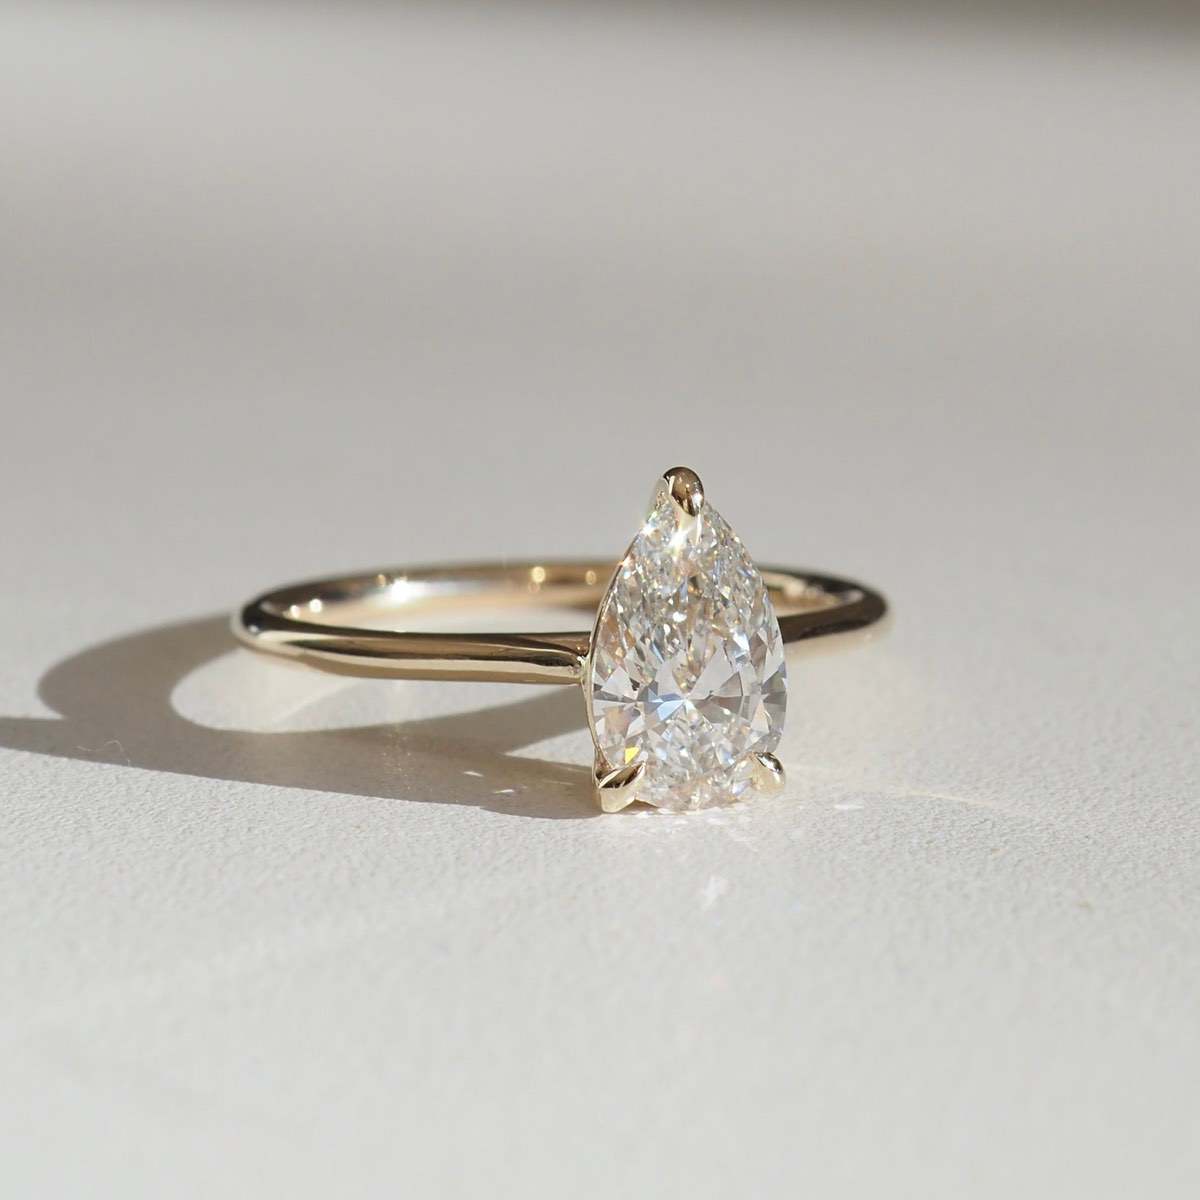 Buy 10 CT Pear Shaped Engagement Ring,moissanite Three Stone Ring,unique  Large Pear Cut Engagement Ring,white Gold Diamond Wedding Ring,women Online  in India - Etsy